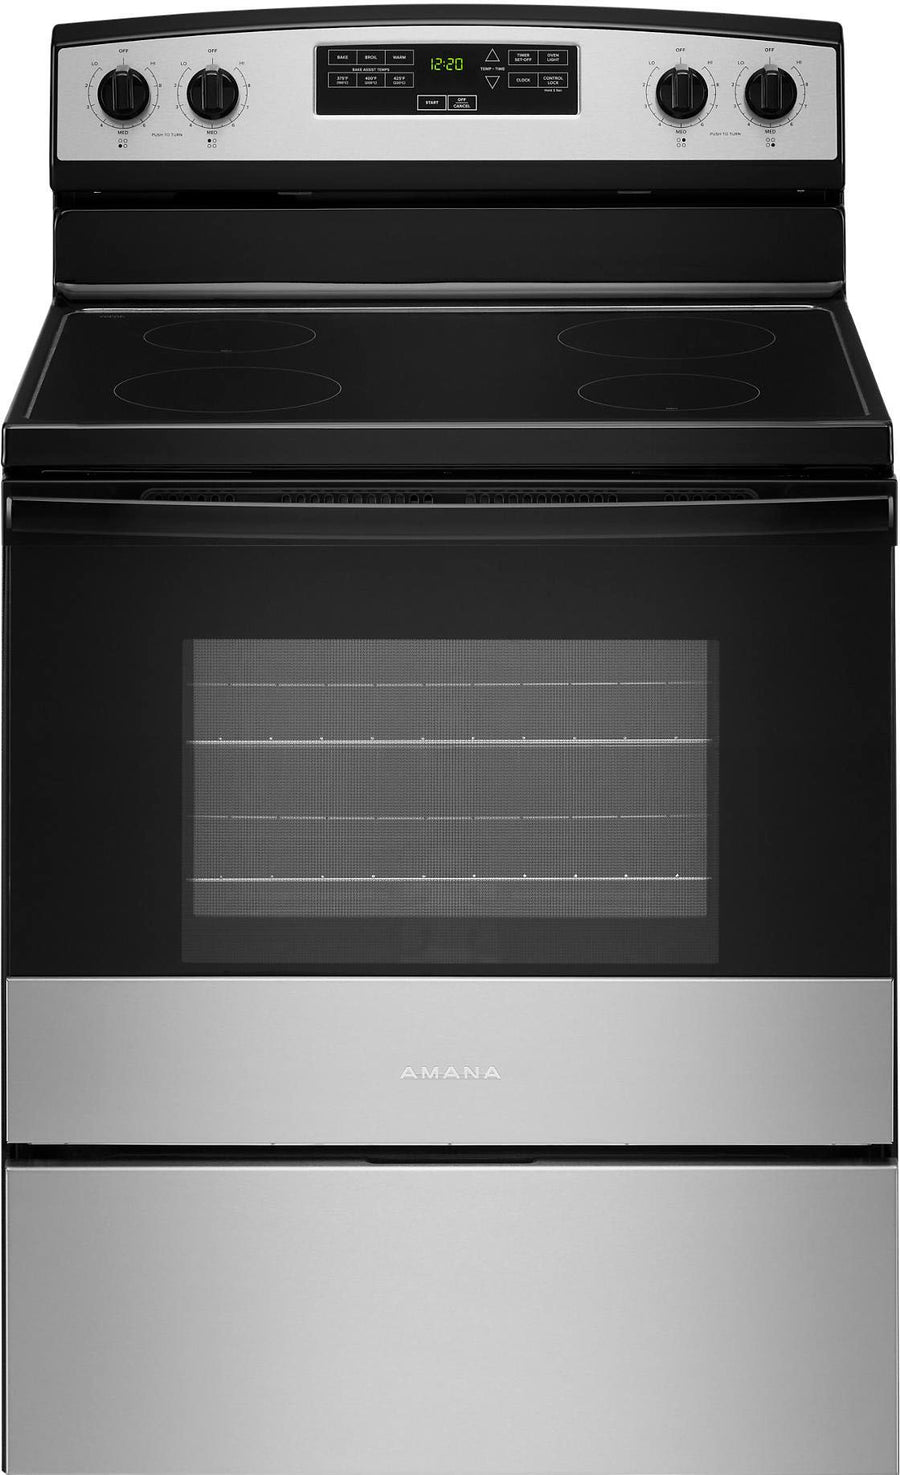 Amana - 4.8 Cu. Ft. Freestanding Double Oven Electric Range with Versatile Cooktop - Stainless steel_0